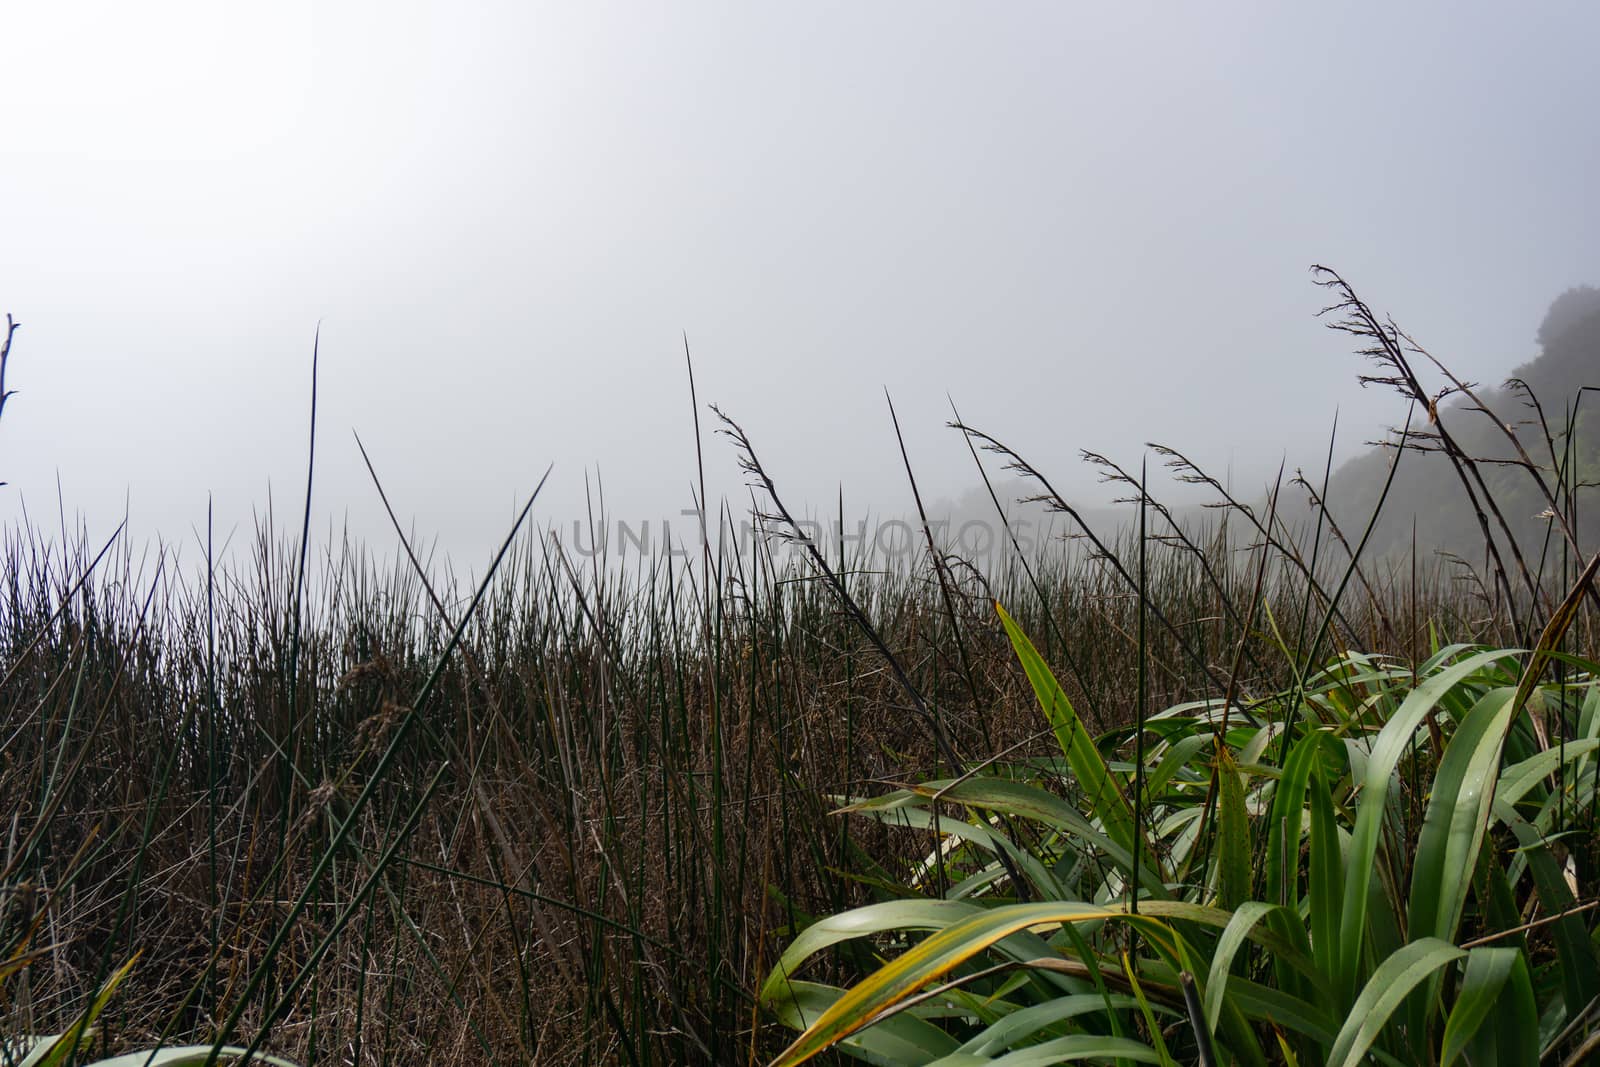 Wetland vegetation form low perspective under hazy grey winter s by brians101